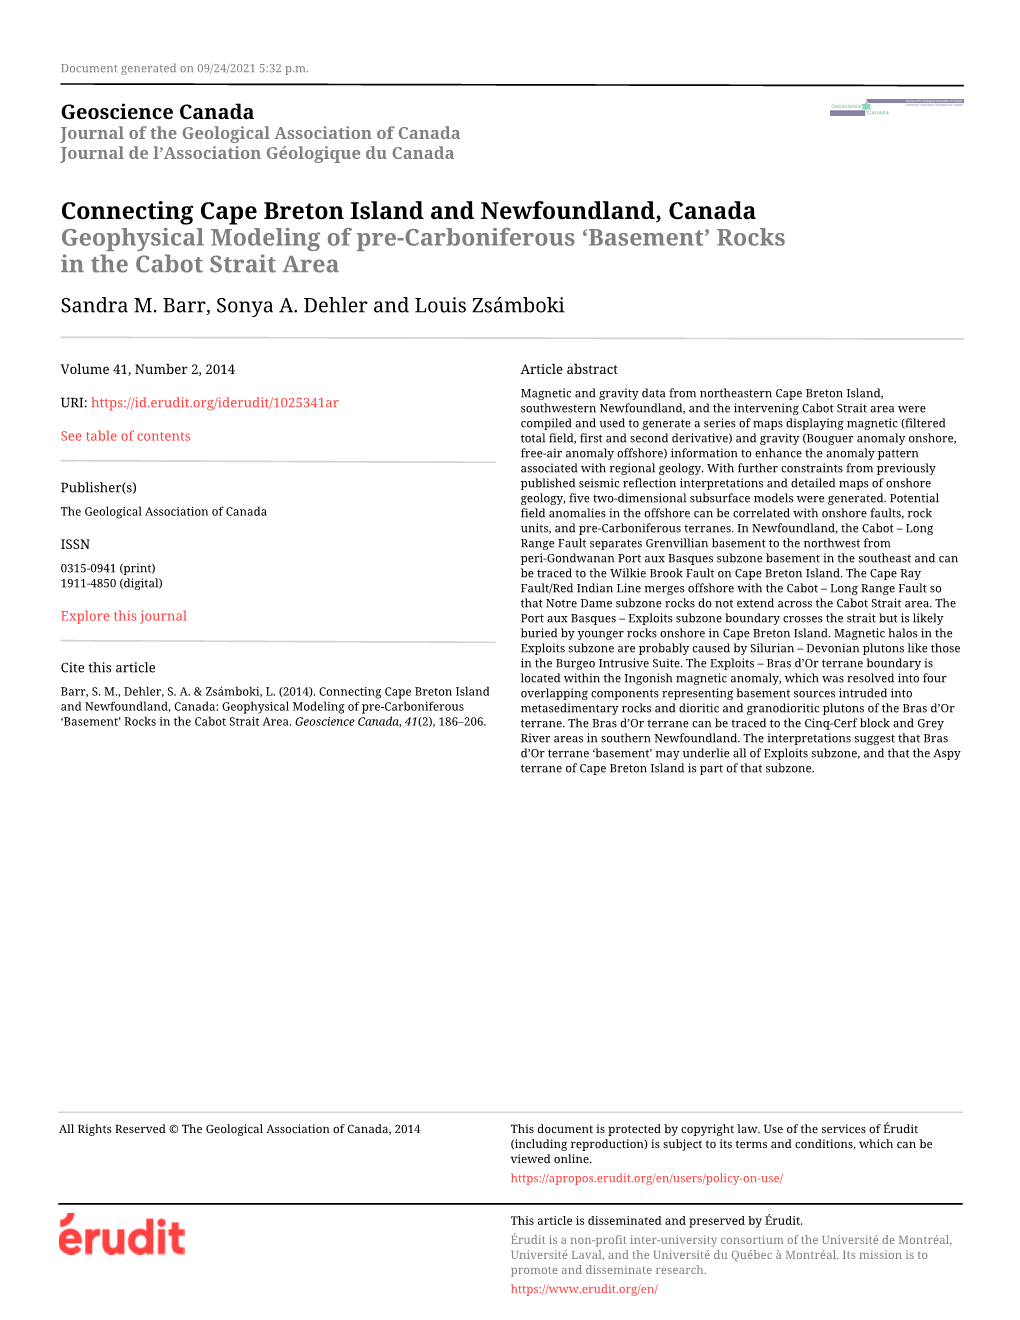 Connecting Cape Breton Island and Newfoundland, Canada Geophysical Modeling of Pre-Carboniferous ‘Basement’ Rocks in the Cabot Strait Area Sandra M